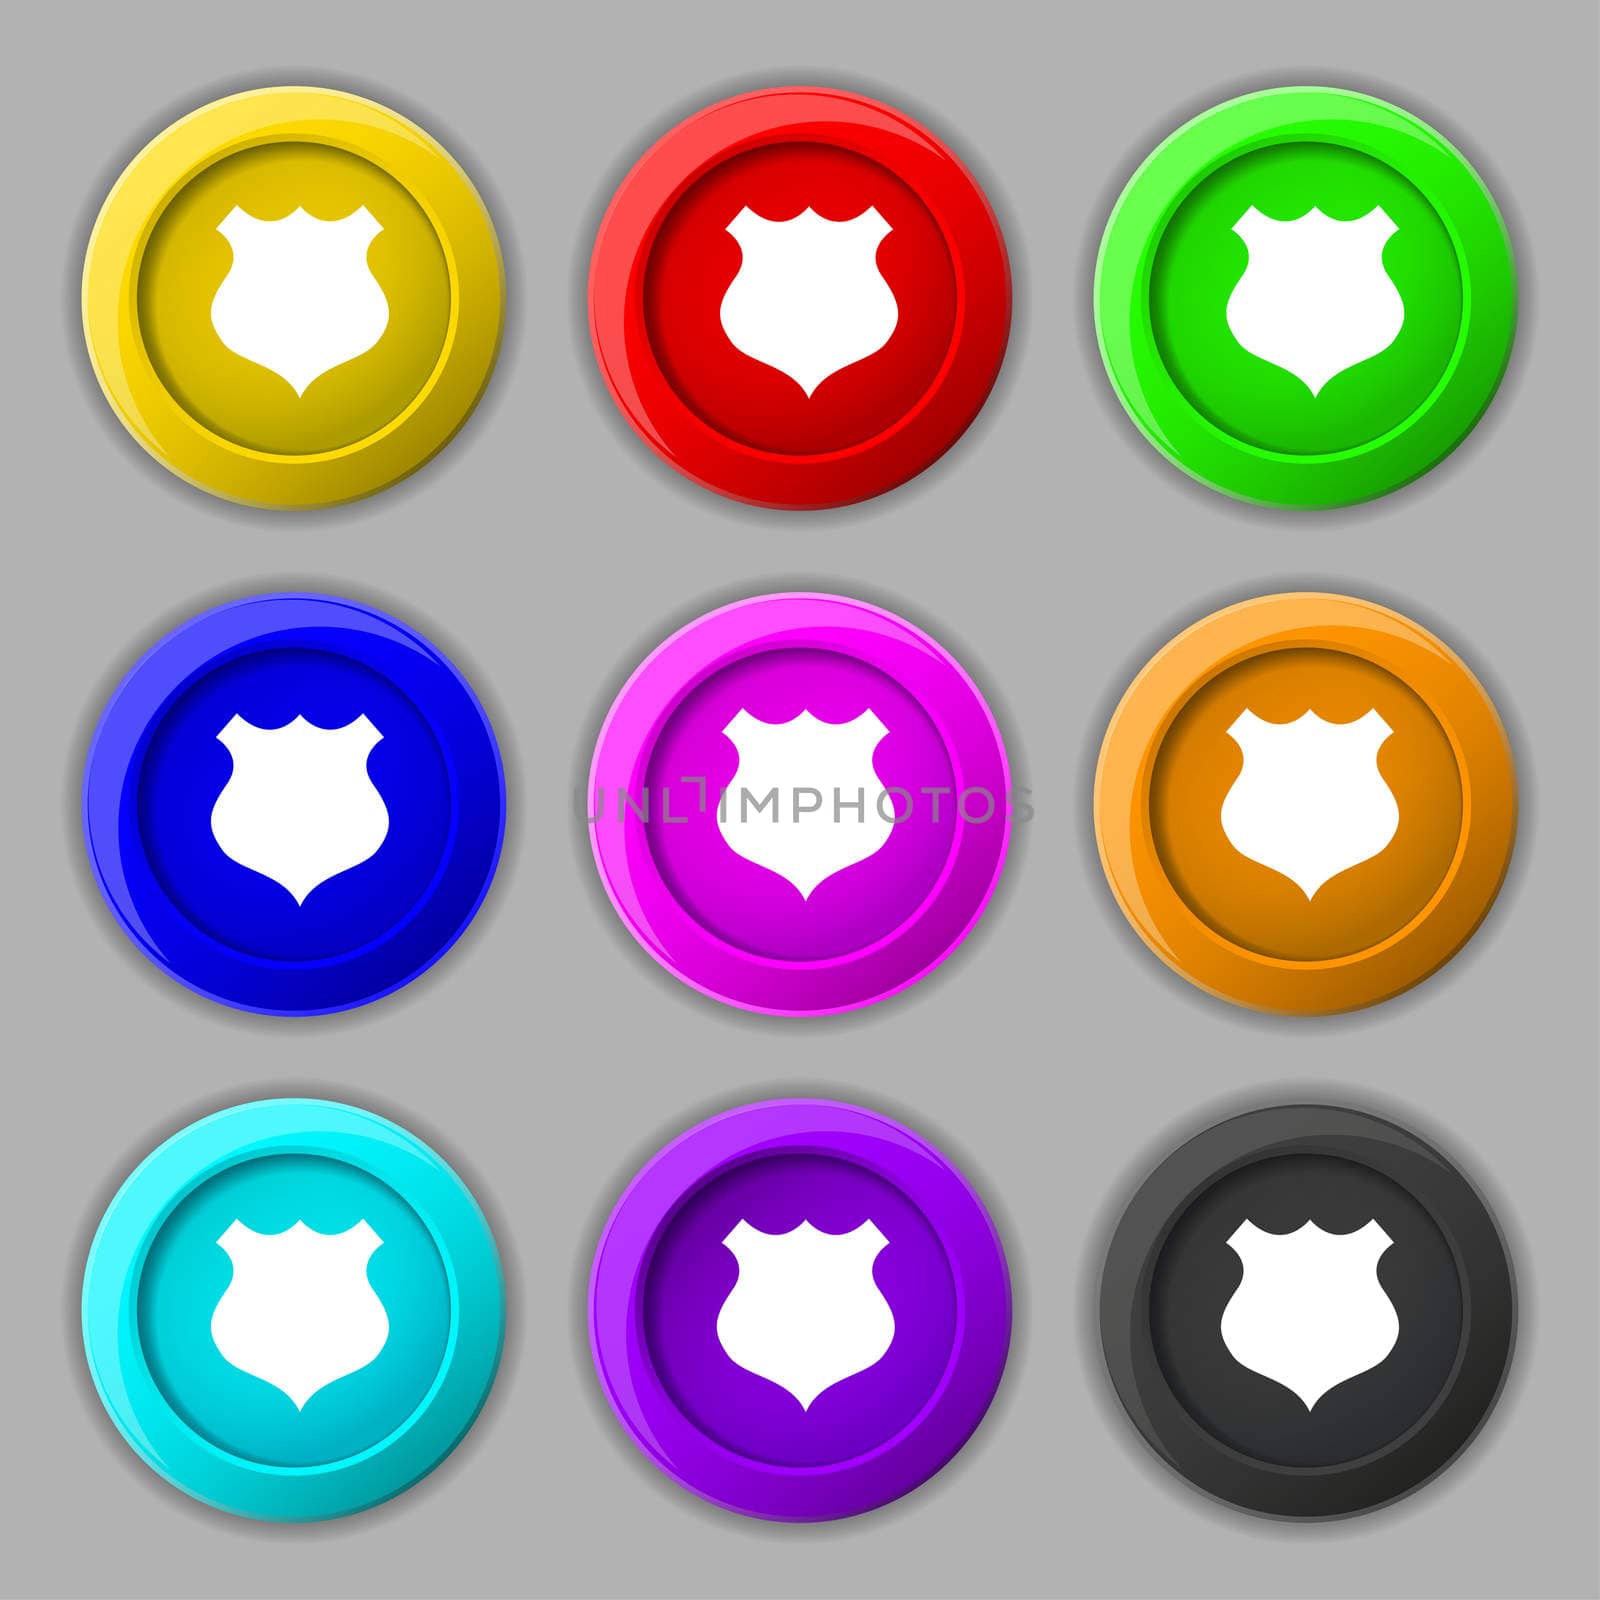 shield icon sign. symbol on nine round colourful buttons. illustration